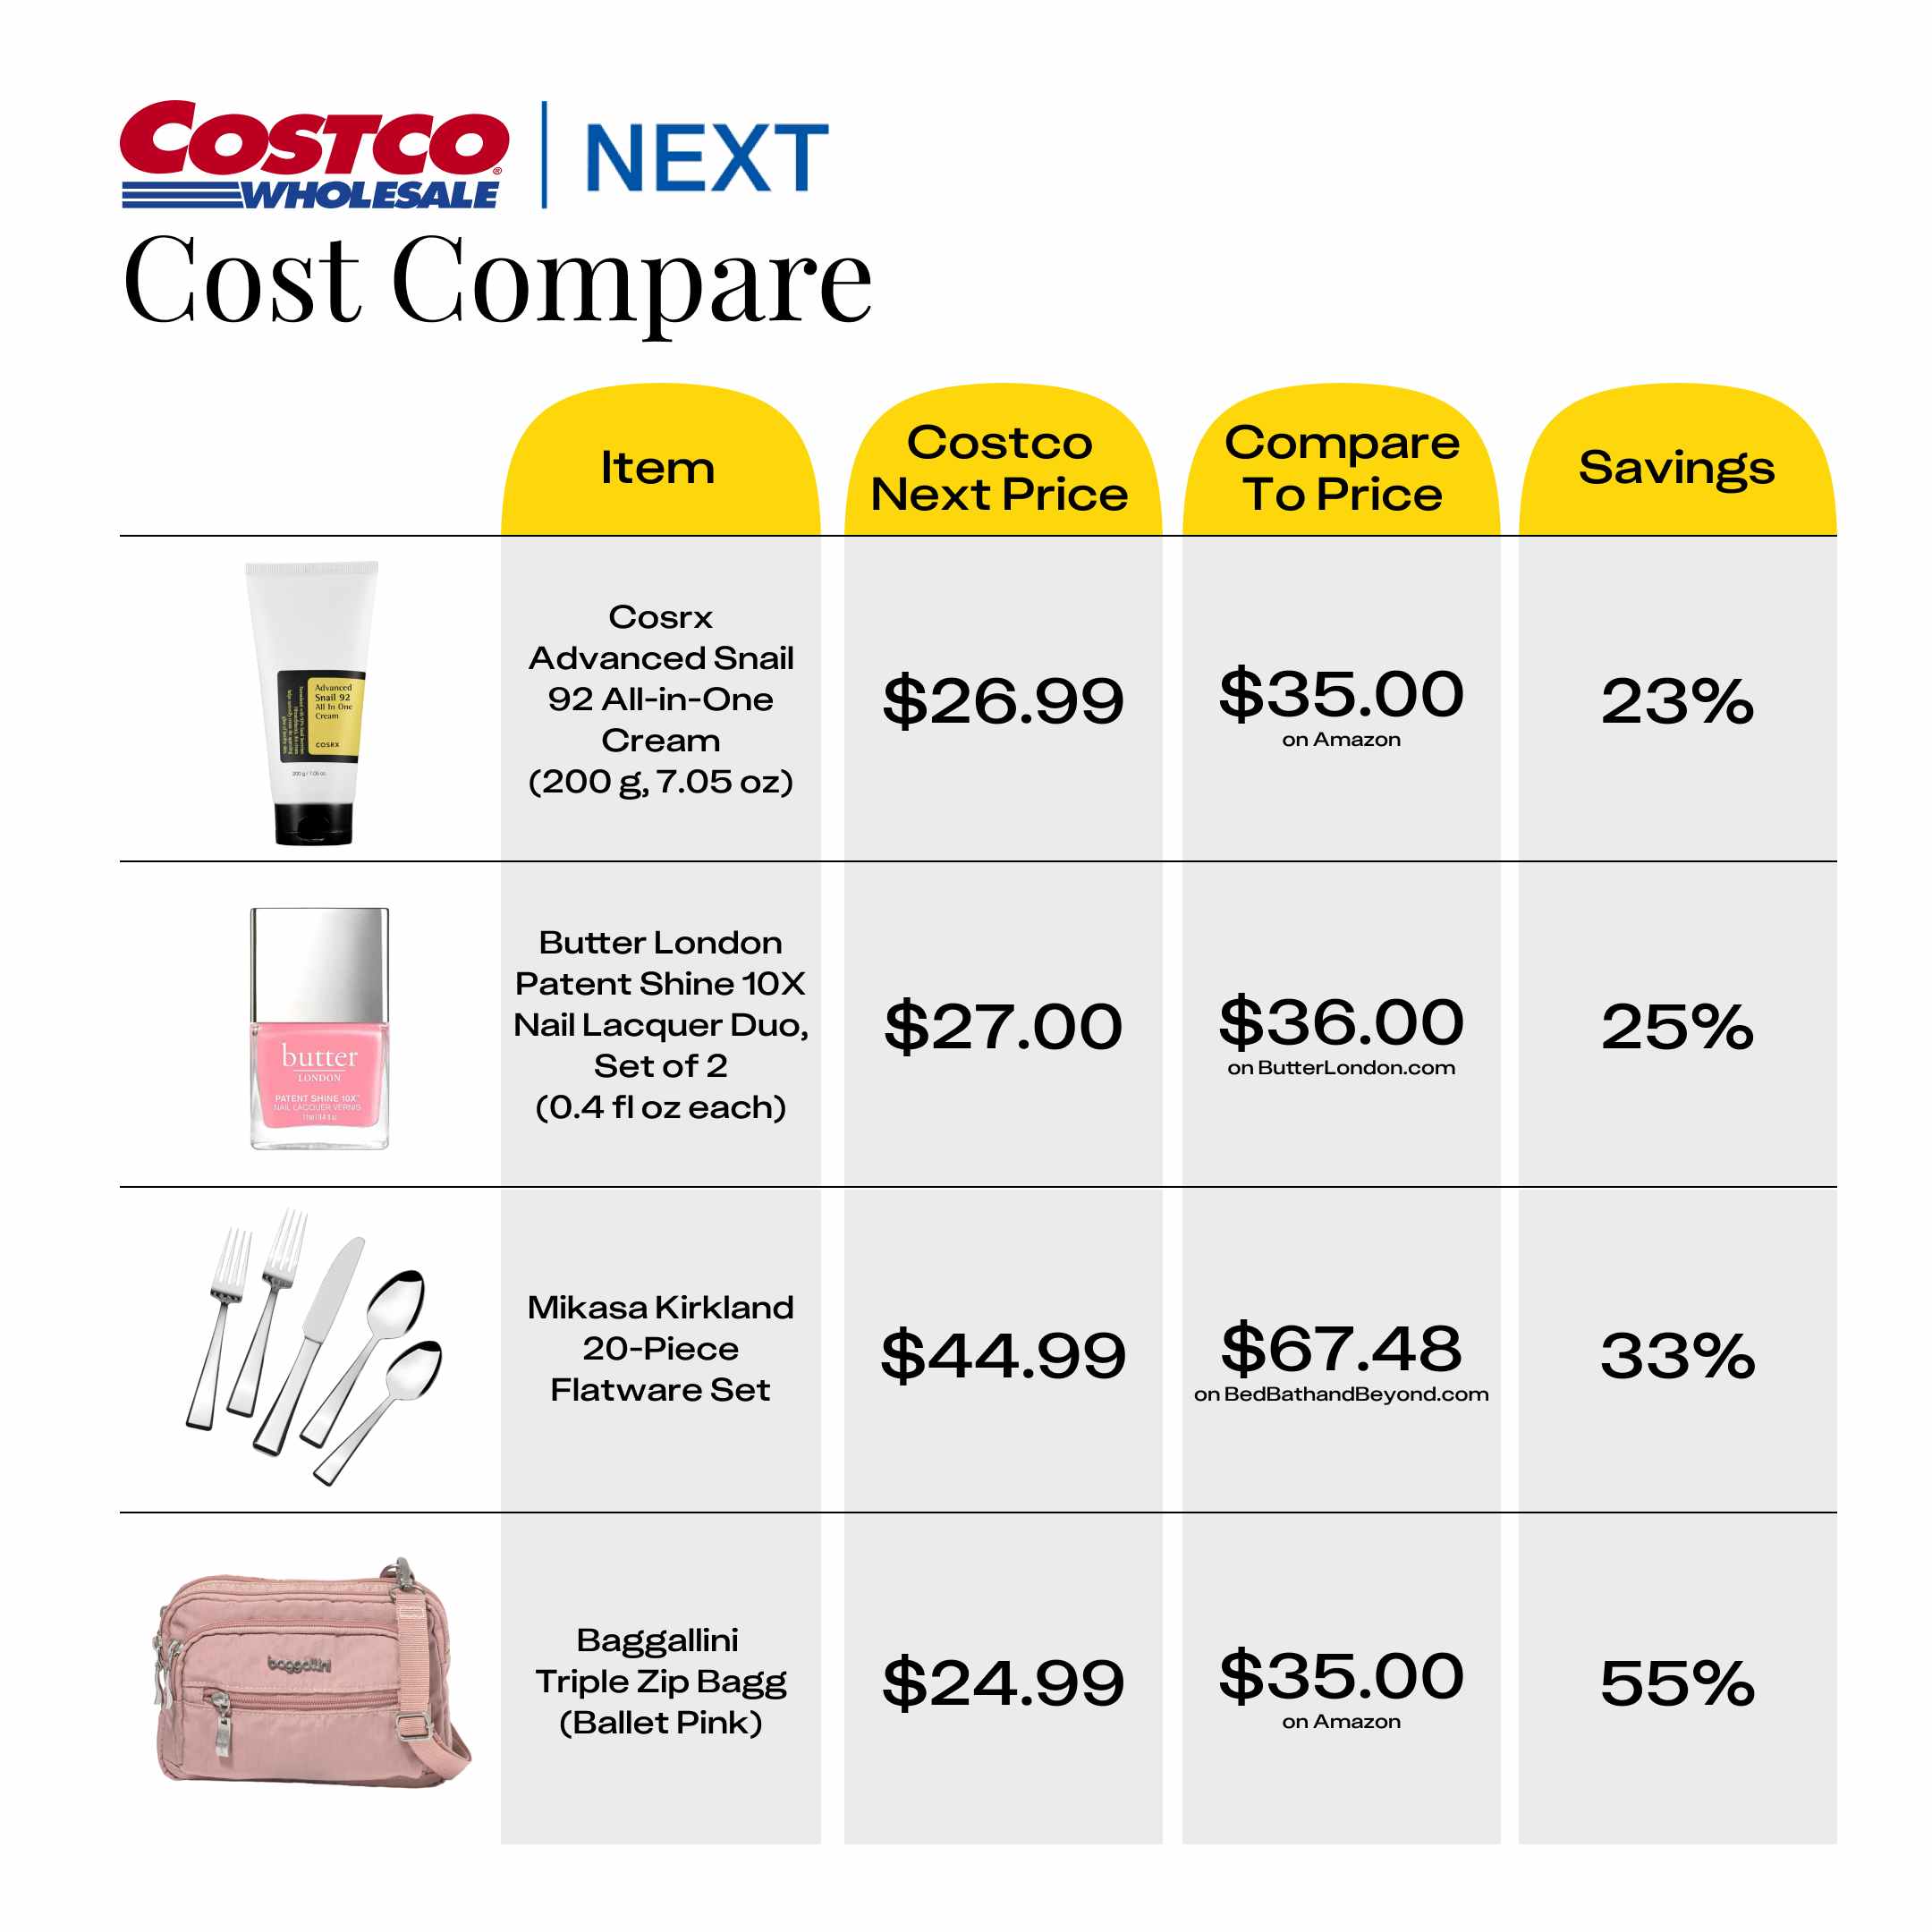 Average savings of four items from Costco Next compared to the next cheapest competitor price, showing an average savings of 23% - 55%.